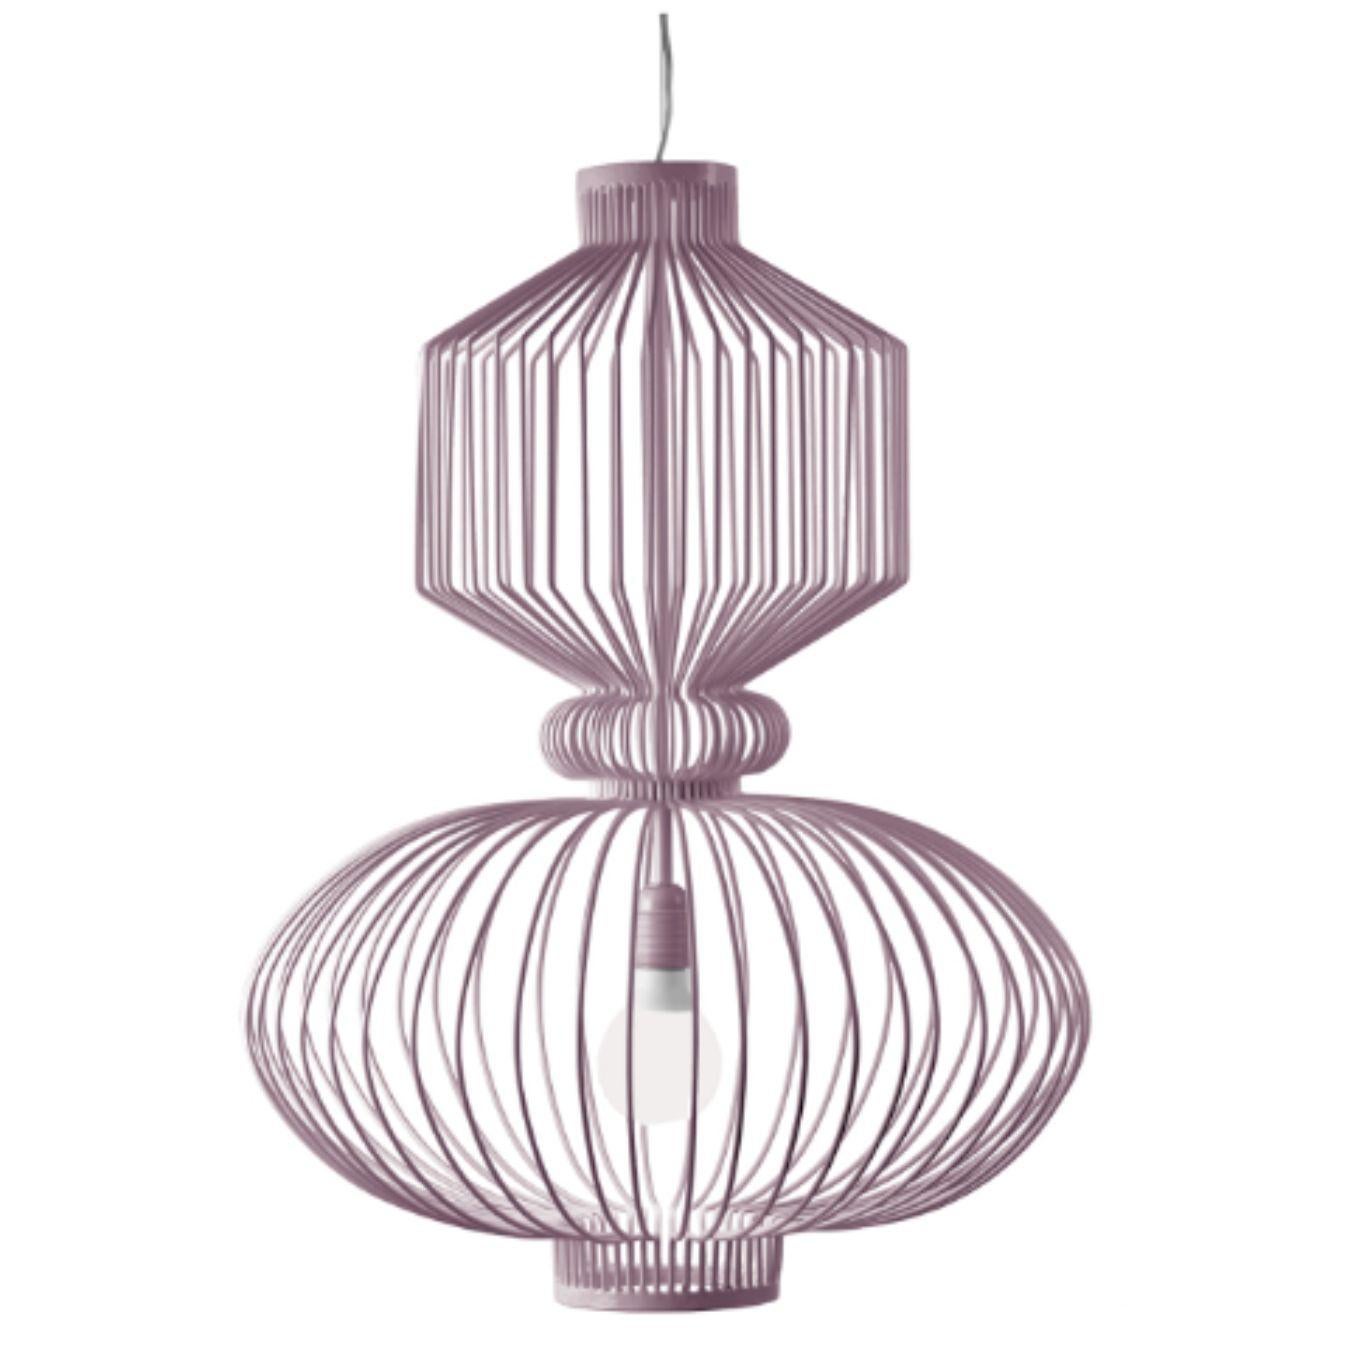 Lilac revolution suspension lamp by Dooq.
Dimensions: W 55 x D 55 x H 70 cm.
Materials: lacquered metal, polished or brushed metal
Also available in different colors and materials. 

Information:
230V/50Hz
E27/1x20W LED
120V/60Hz
E26/1x15W LED
bulb